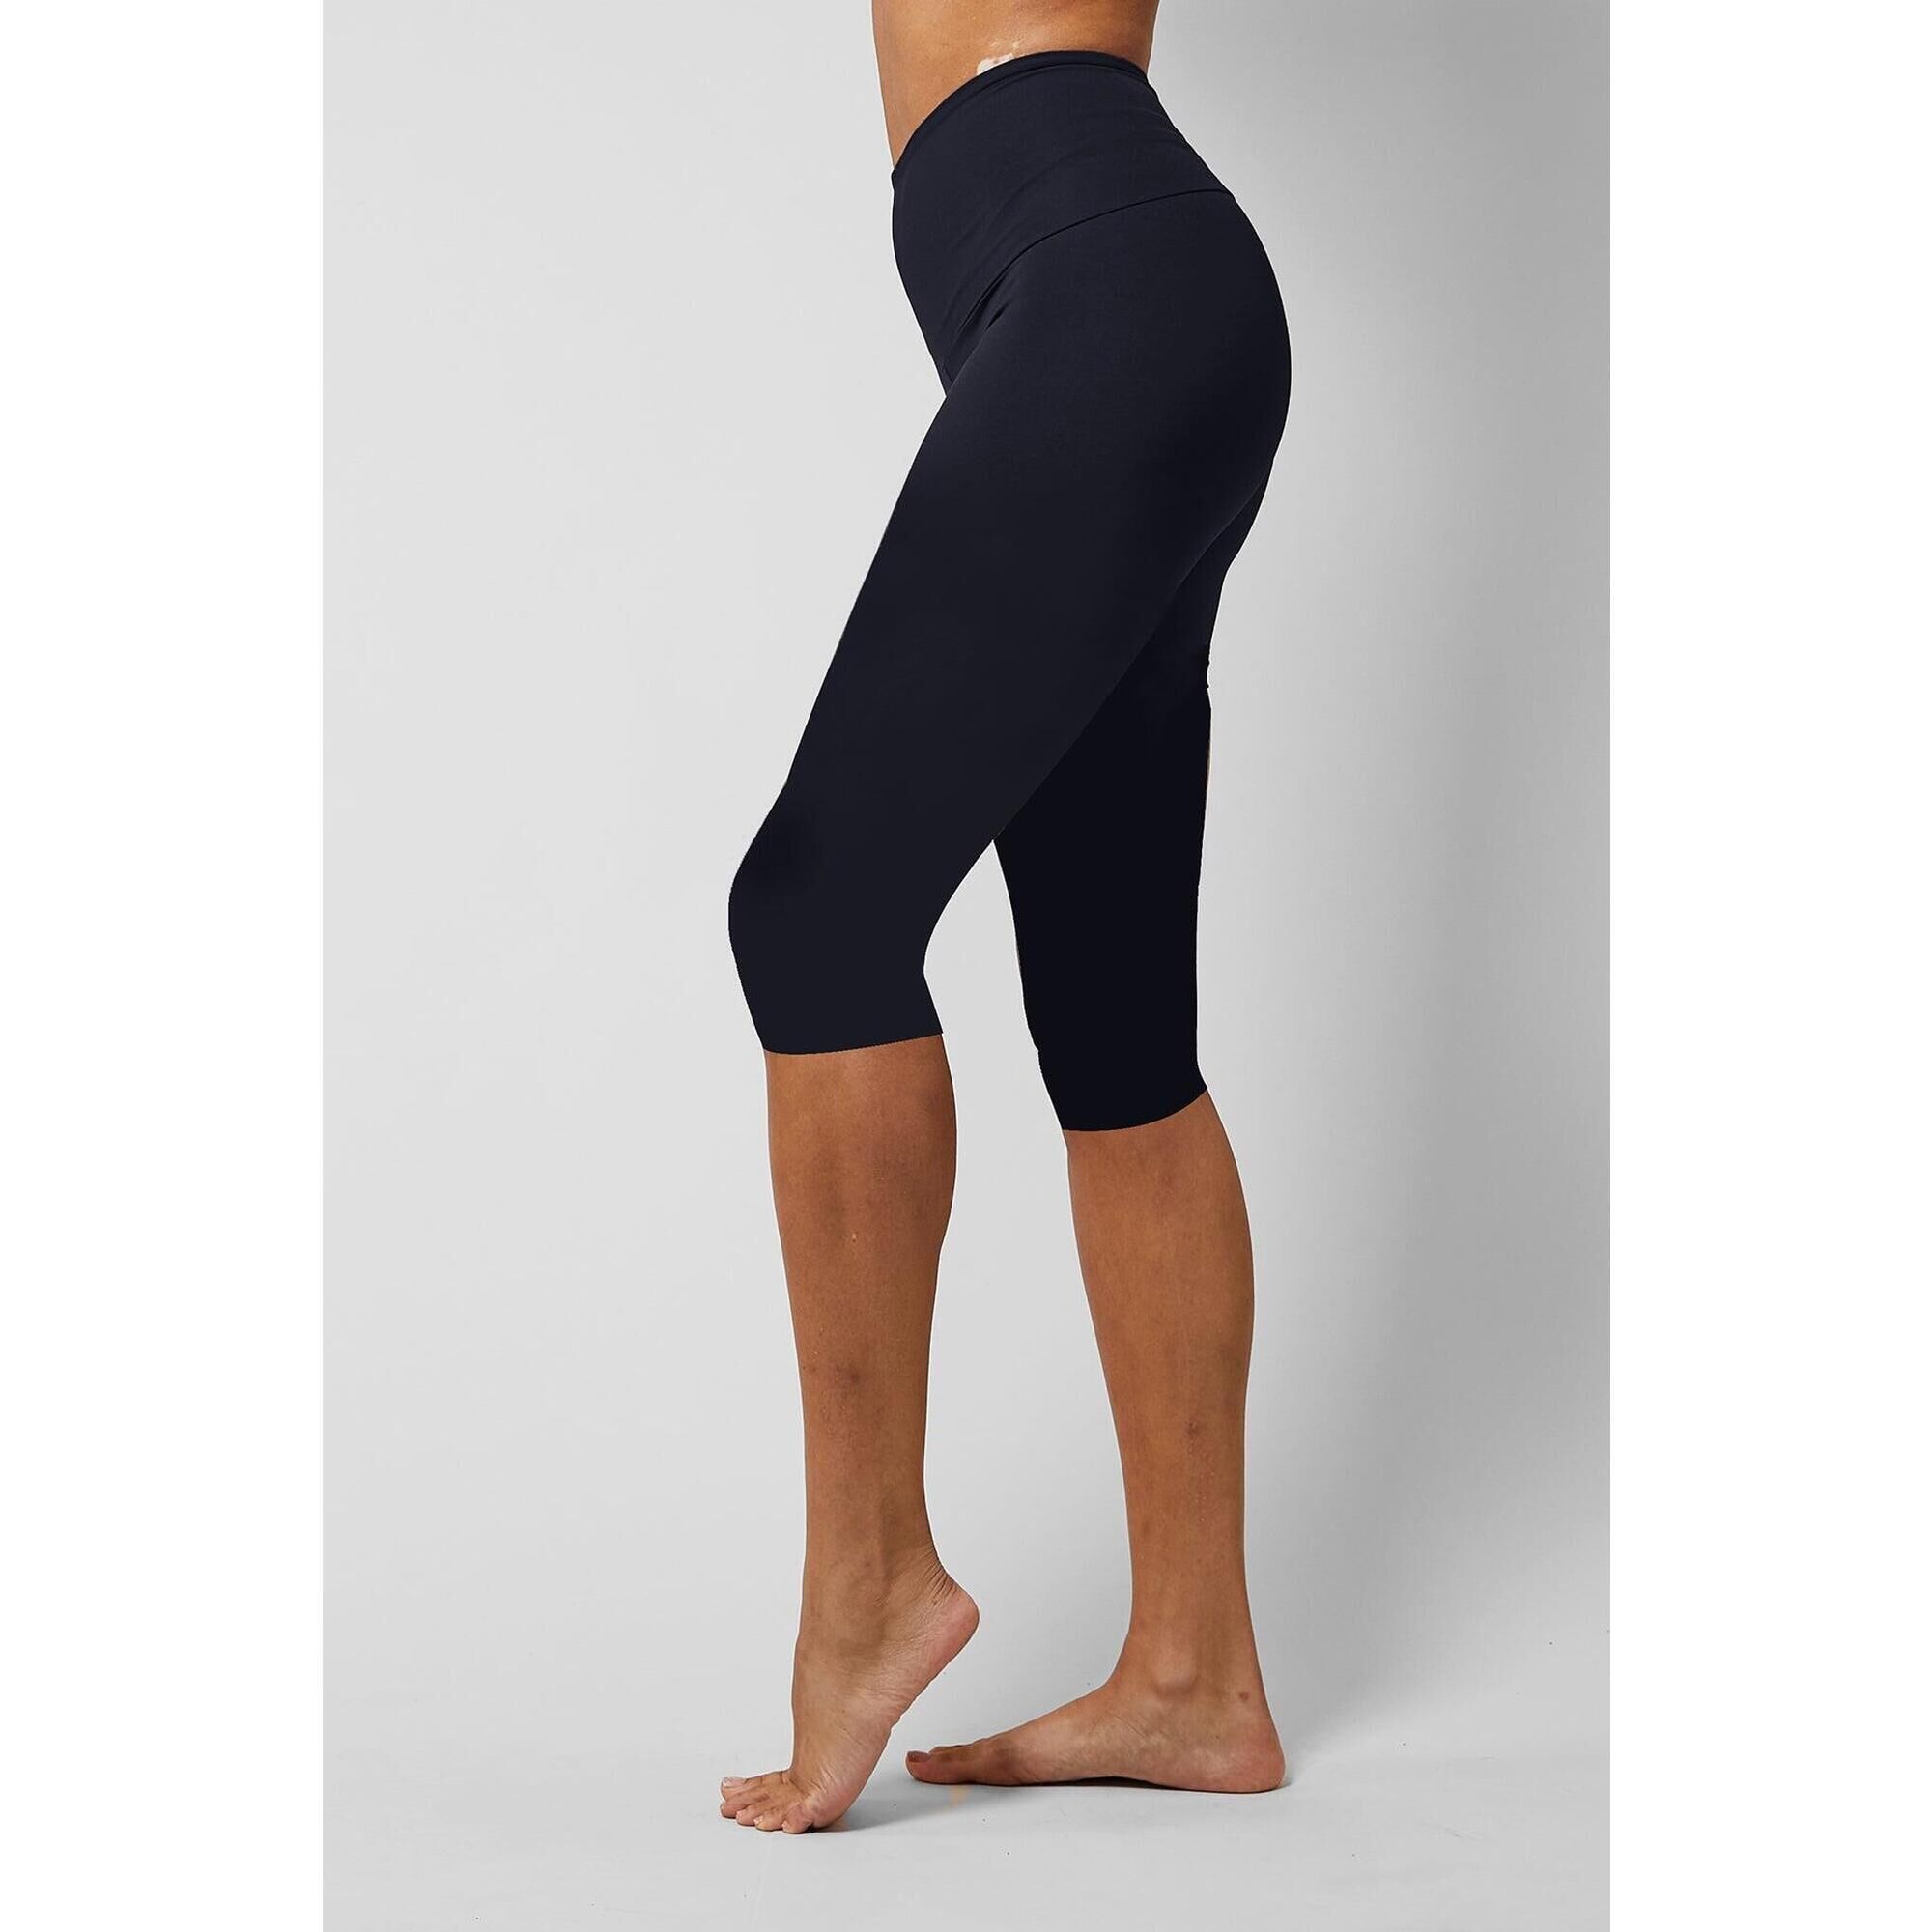 Extra Strong Compression Stirrup Leggings with Tummy Control Black– TLC  Sport